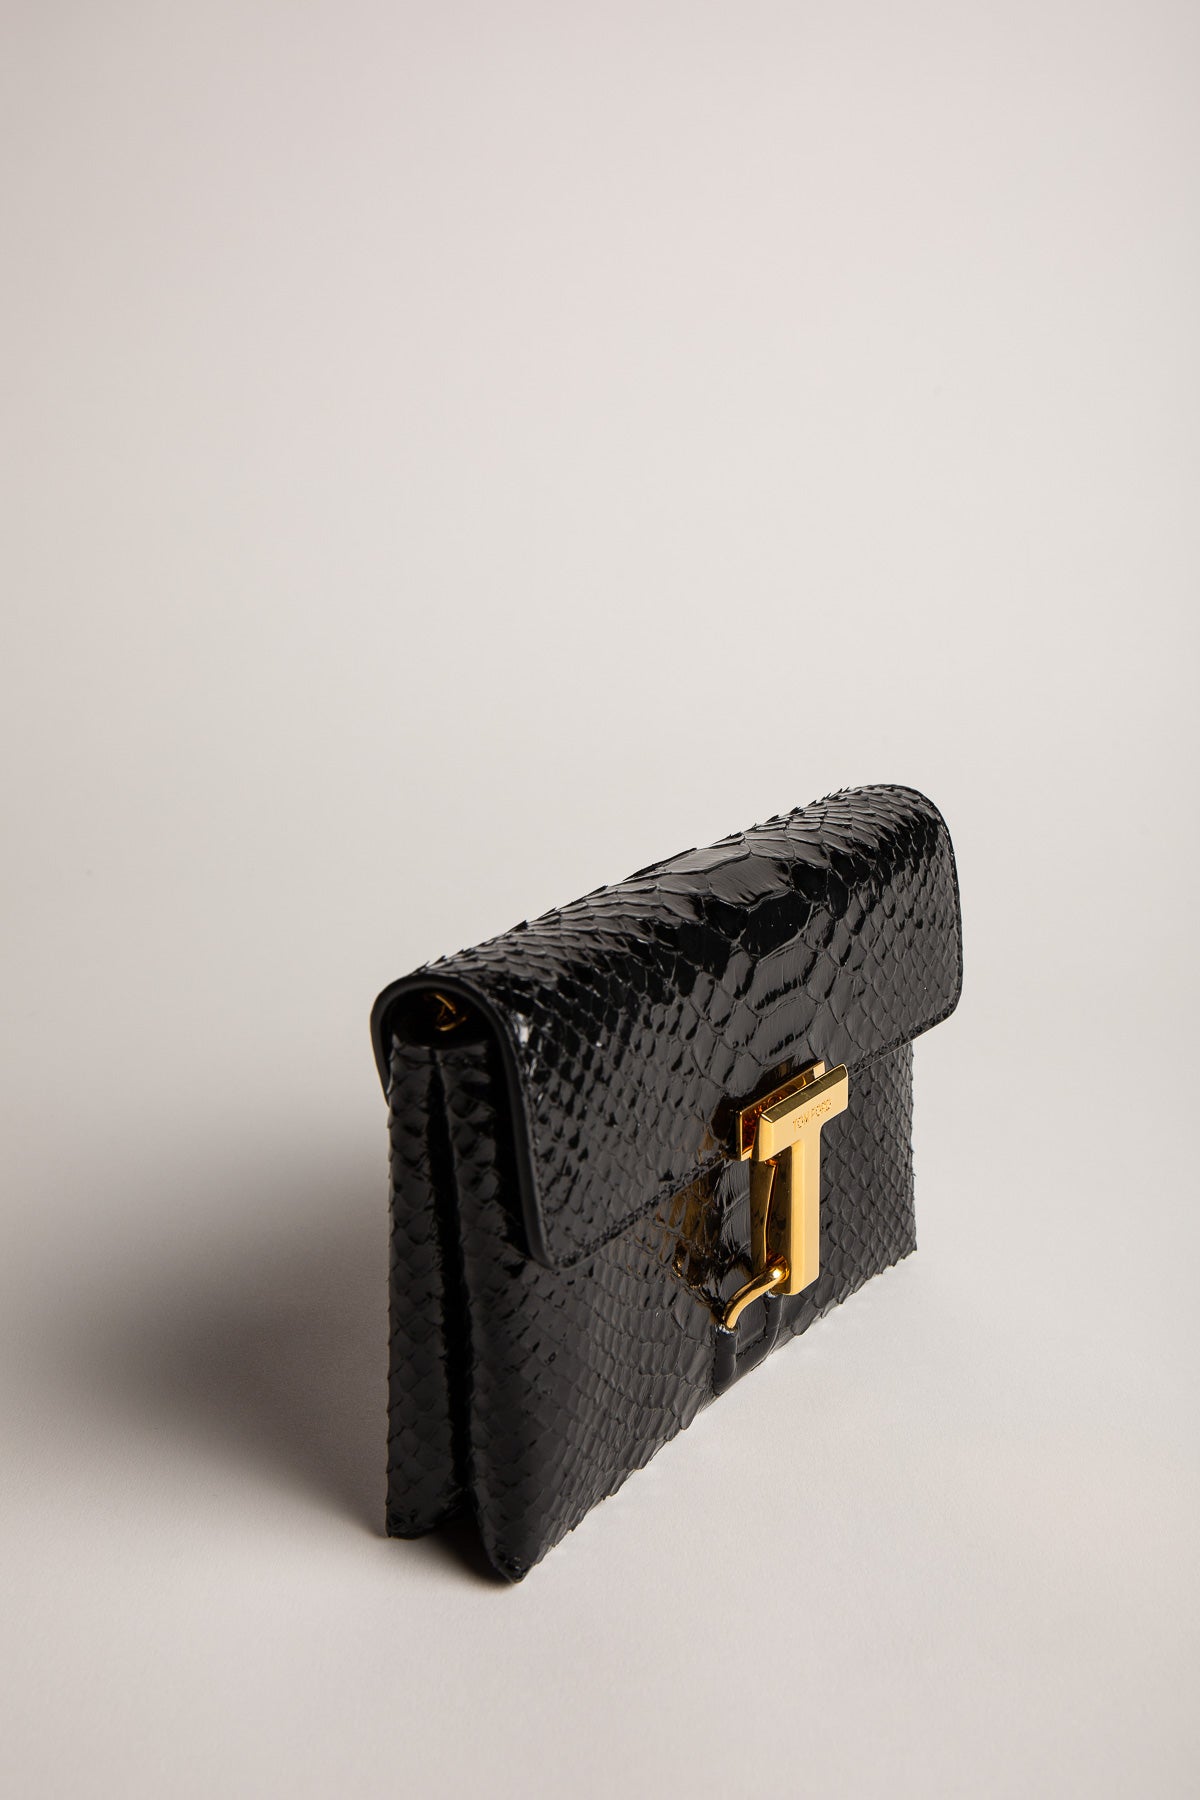 TOM FORD | GLOSSY STAMPED PYTHON LEATHER MONARCH MINI BAG